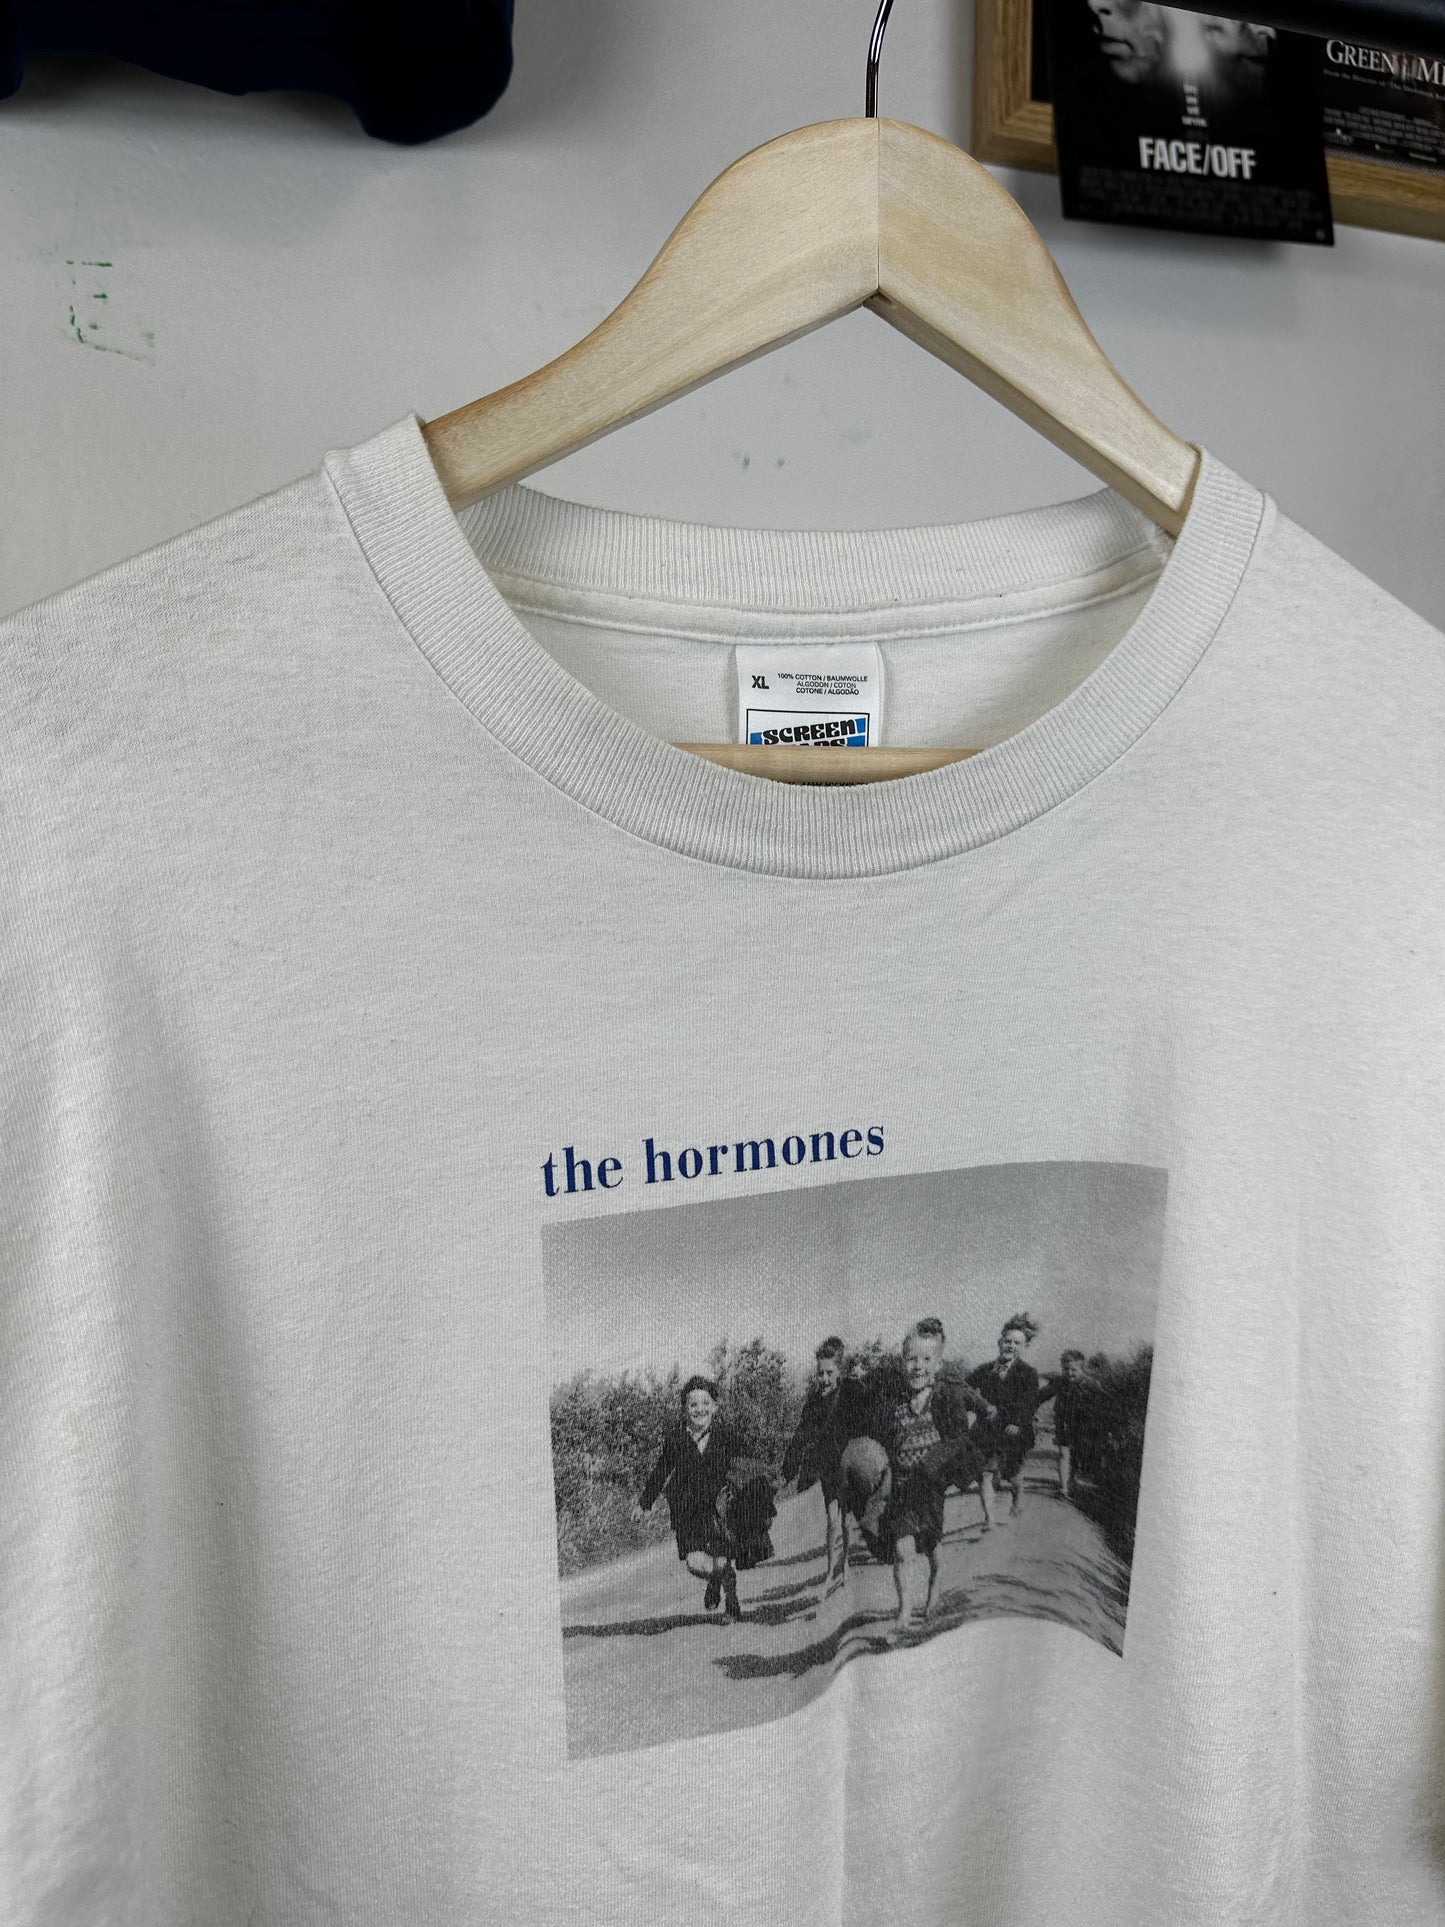 Vintage The Hormones “Stay Ahead” 90s t-shirt